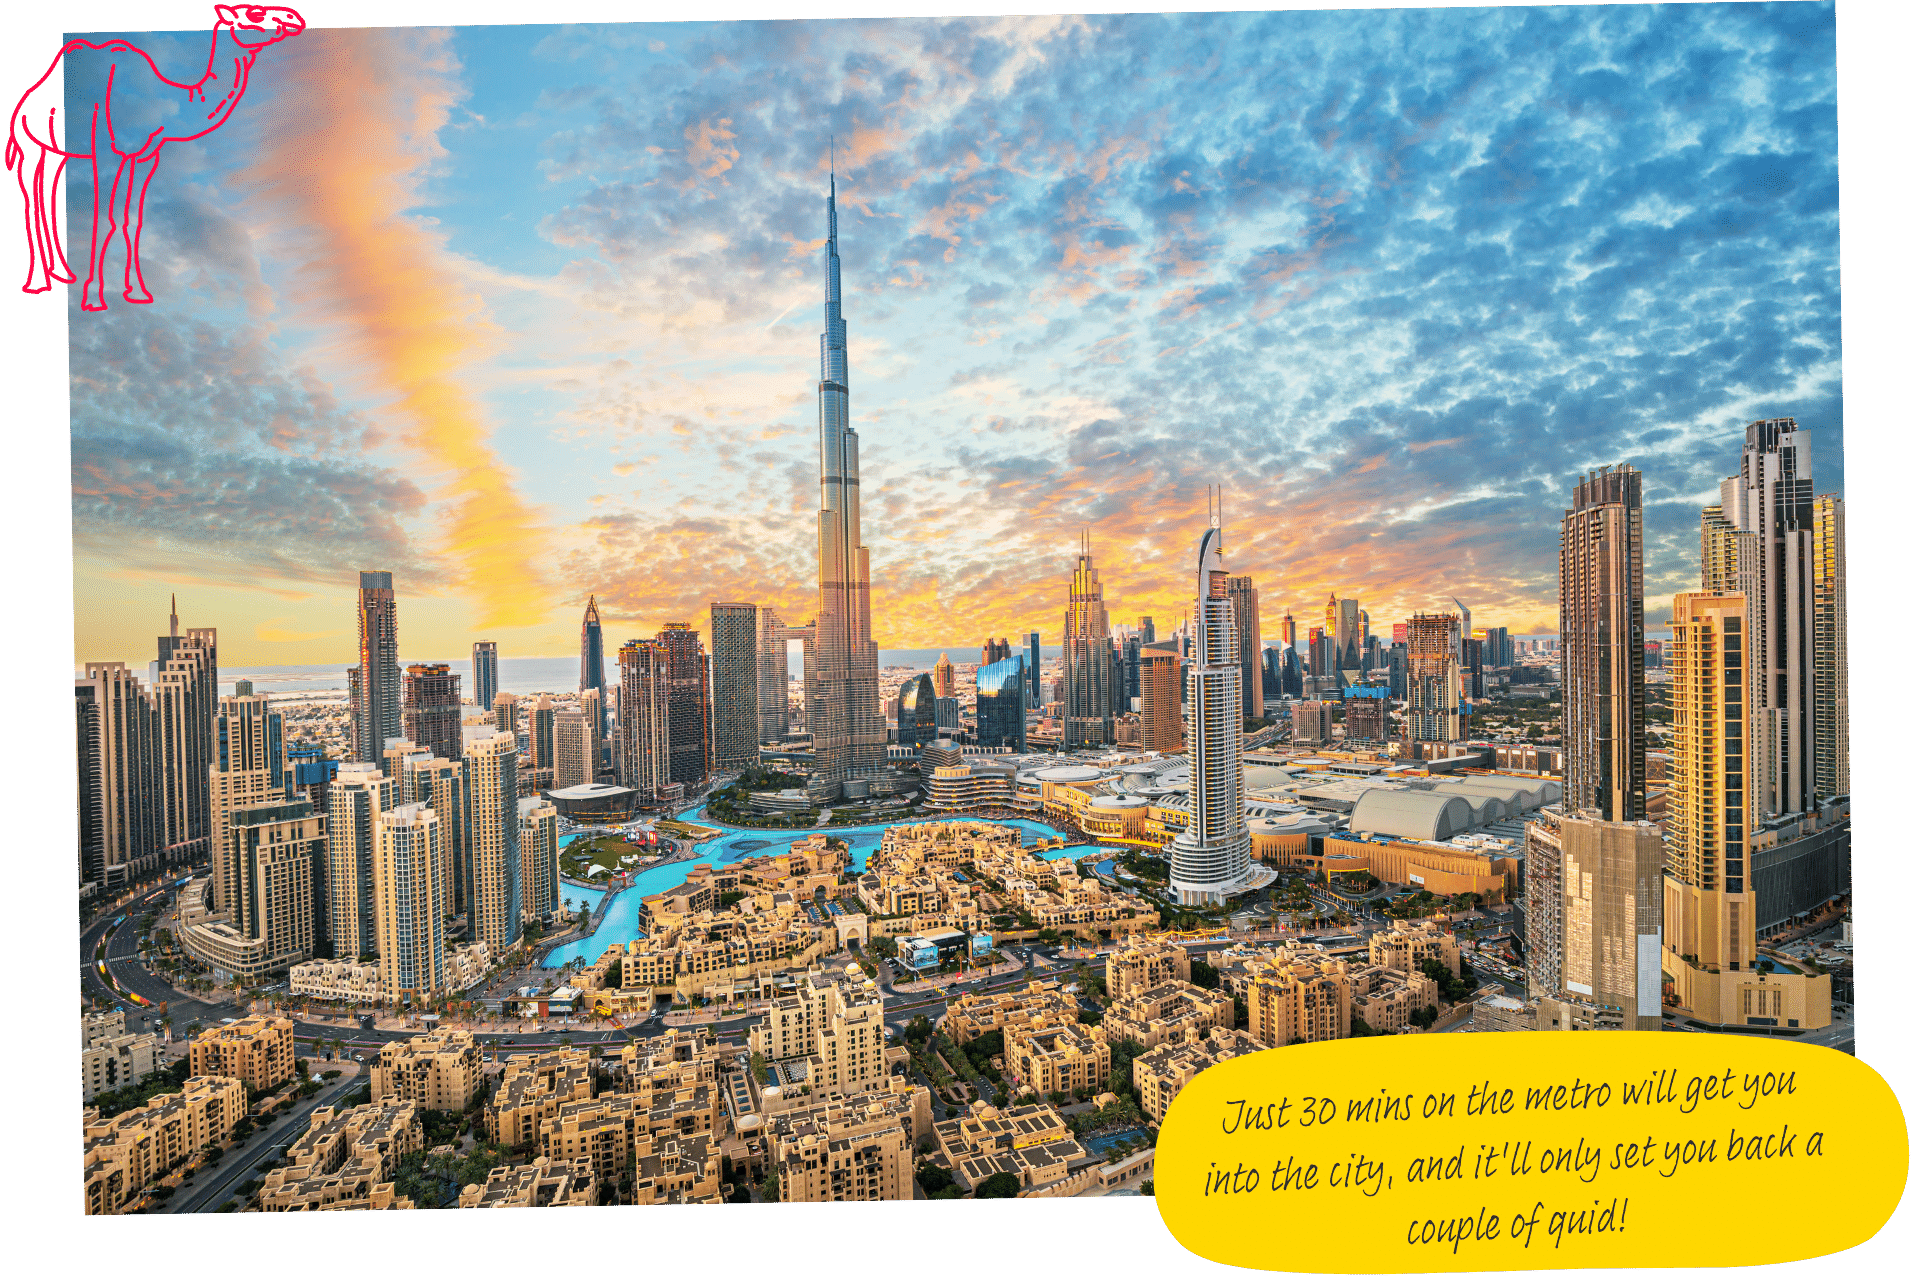 The Dubai skyline, with the Burj Khalifa in the centre - one of the best stopover cities for flying to Asia.